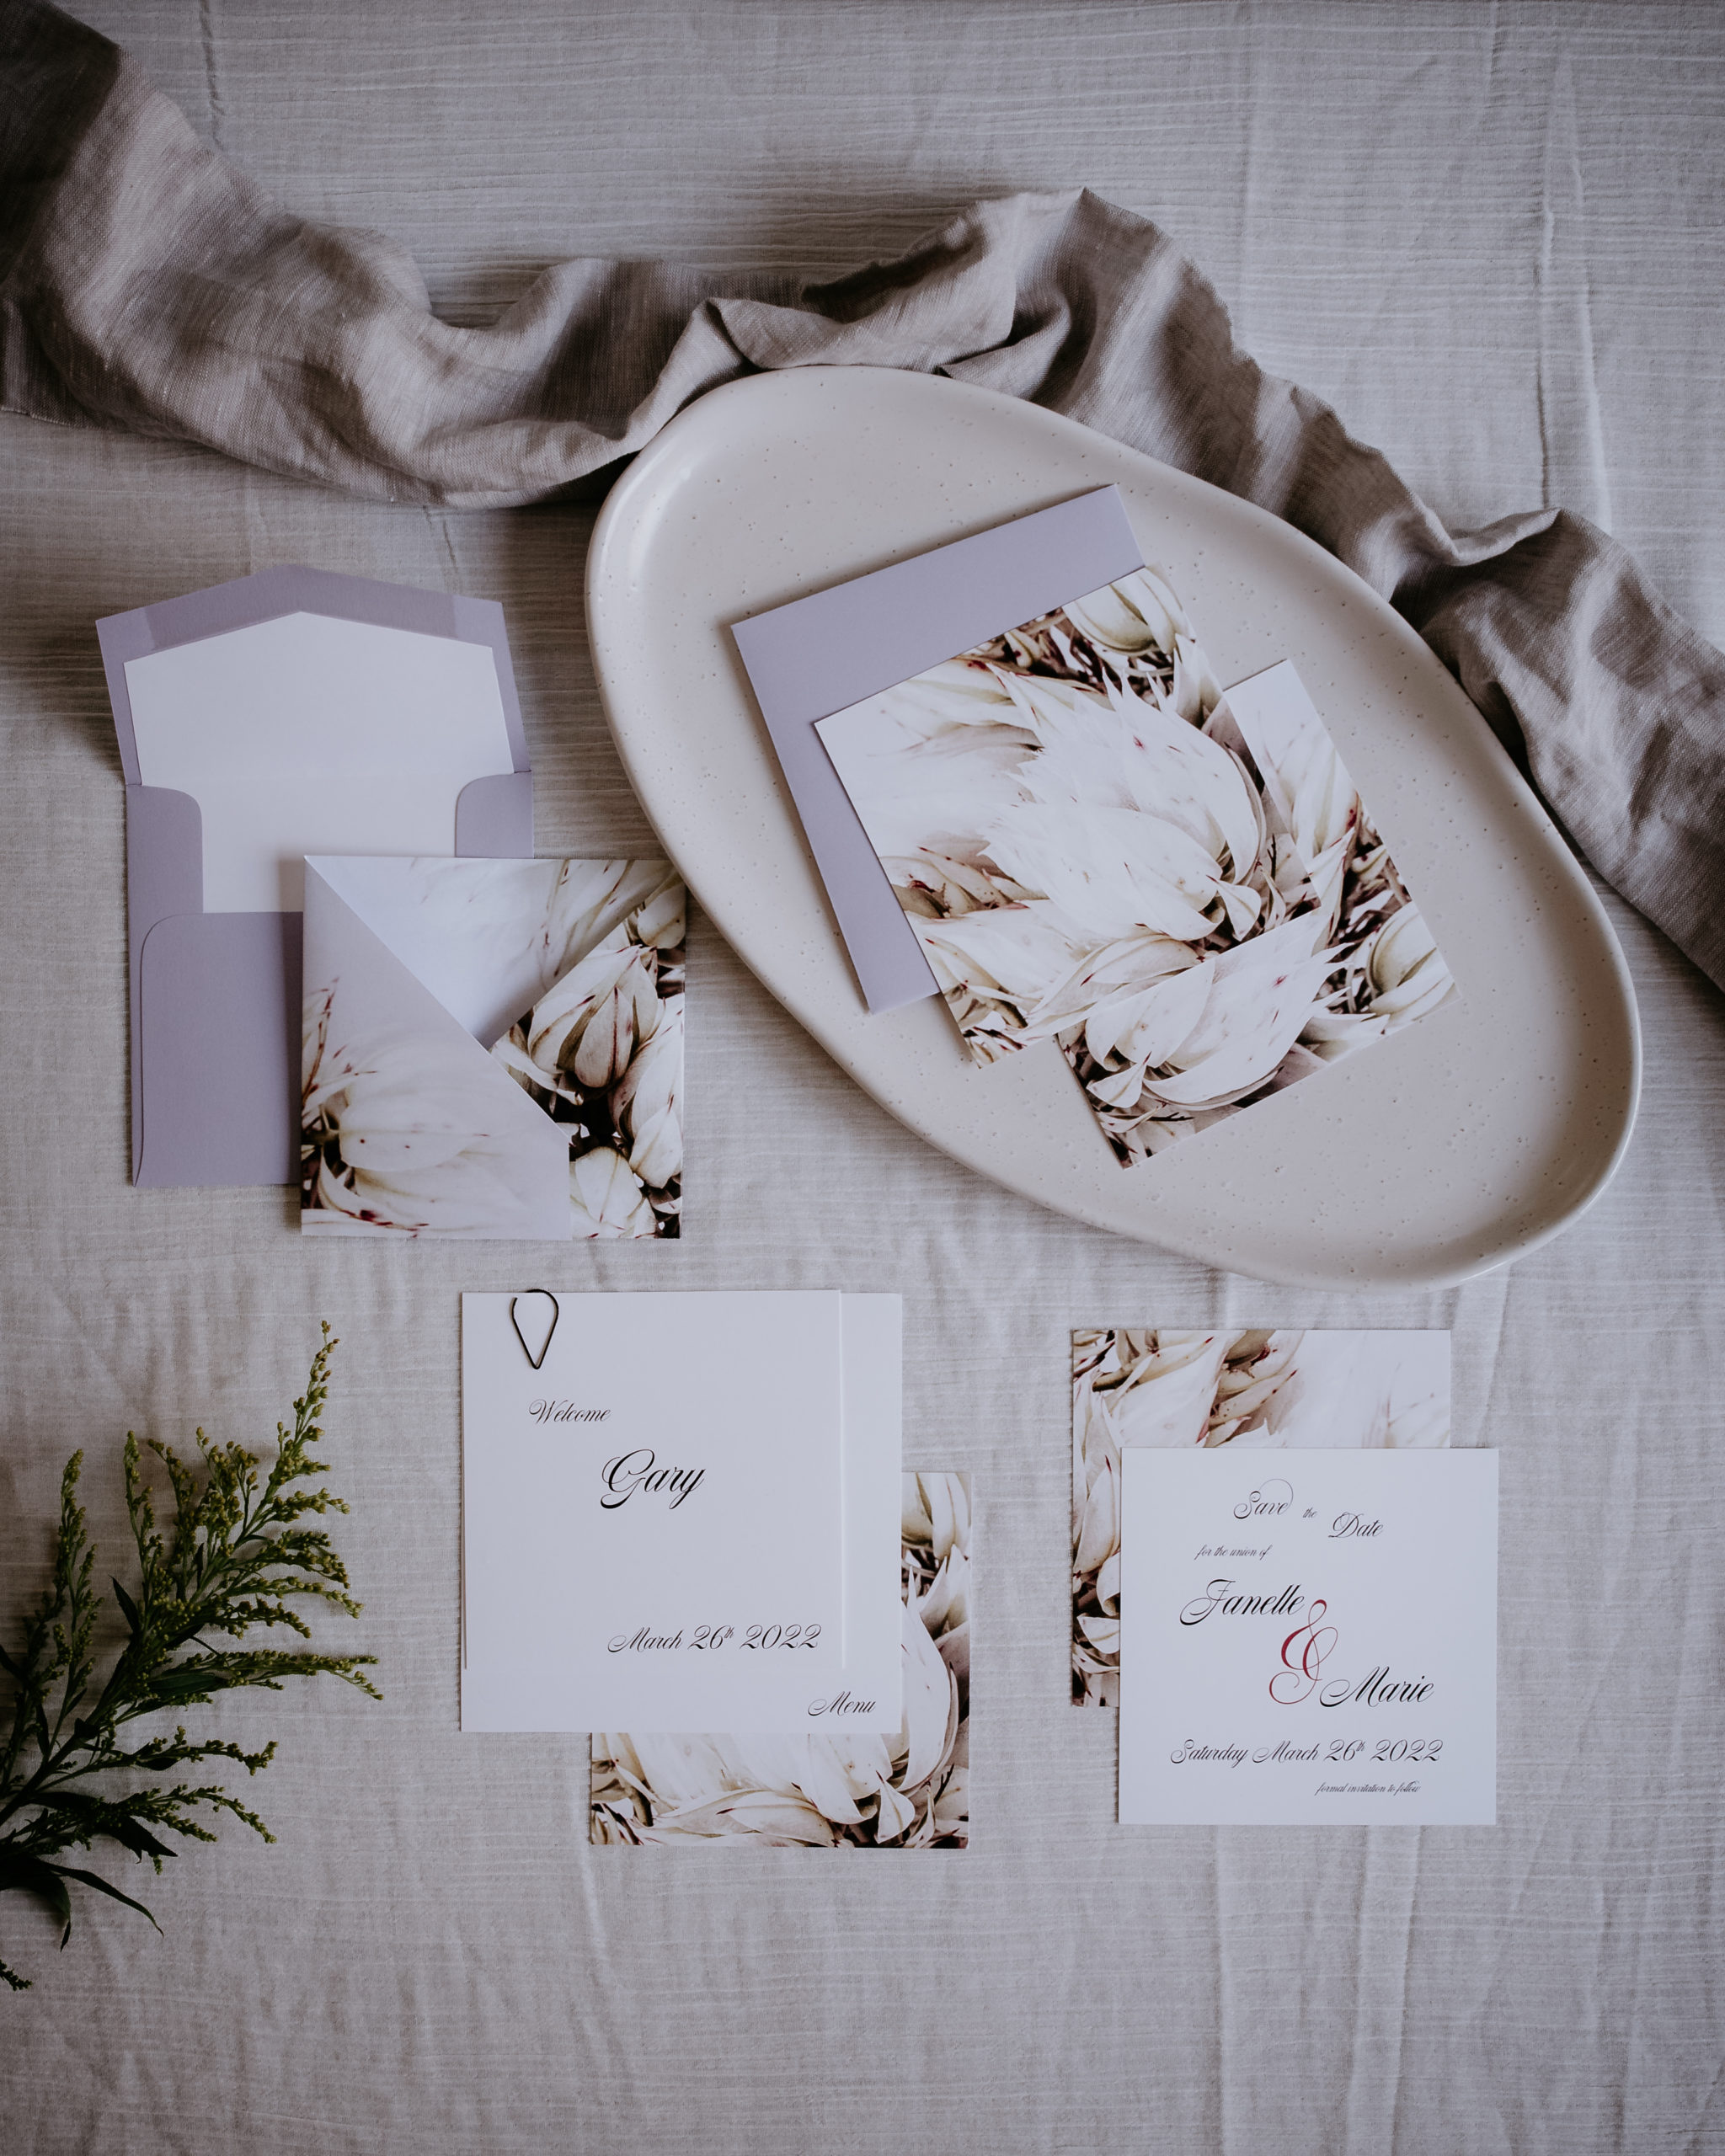 A delicate white and lilac floral wedding invitation with an origami fold. The invitation sits with the save the date card, and the menu and placecard.